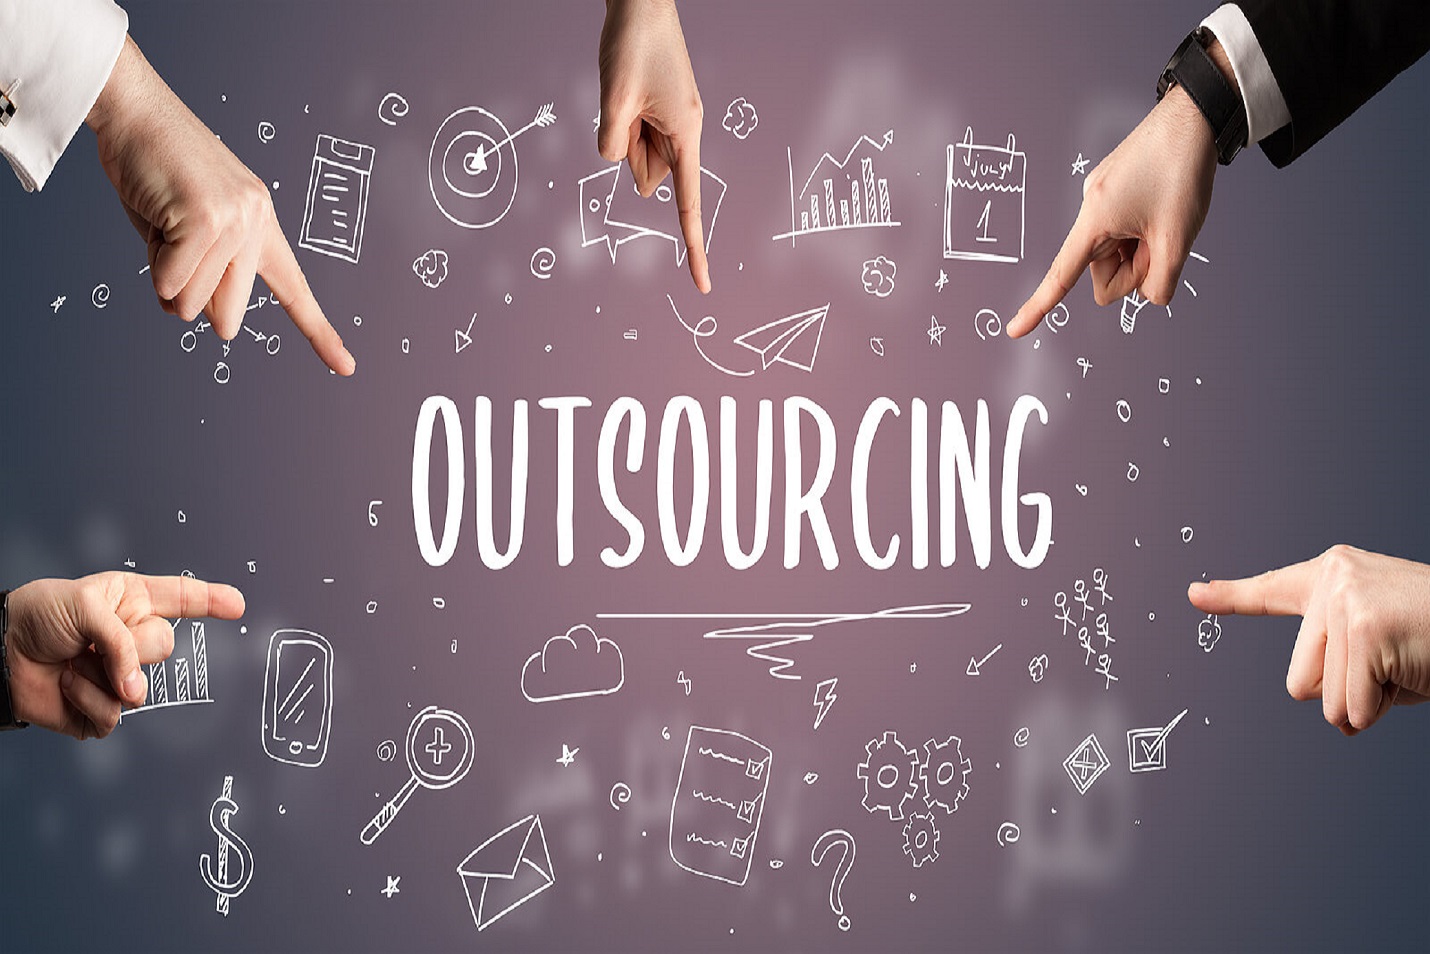 MoneyPenny LLC Blog - Common Misconceptions About Outsourcing